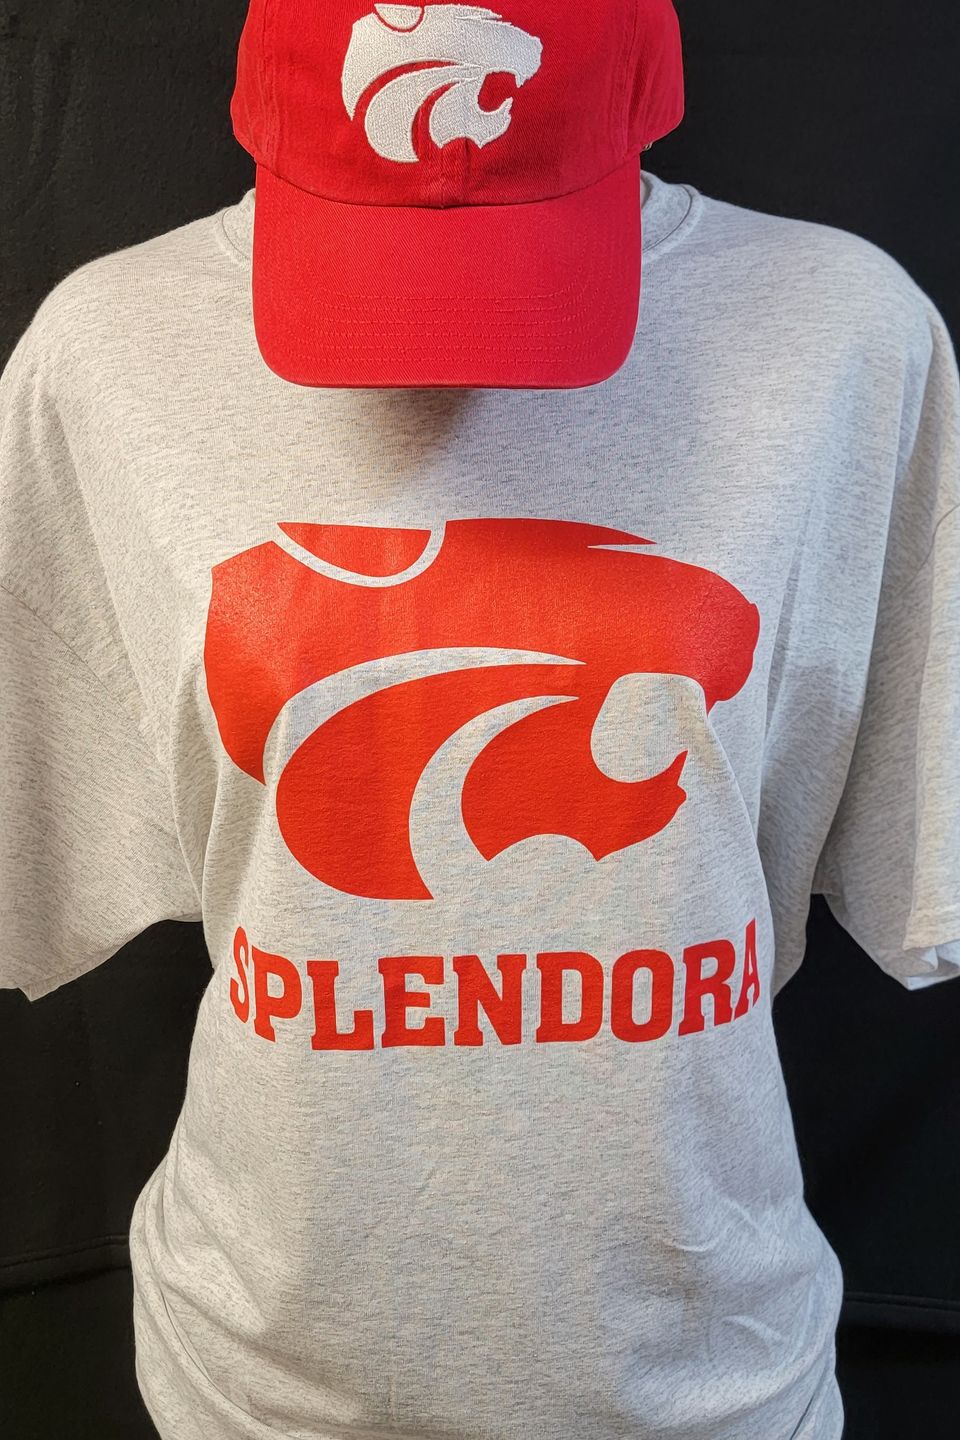 Example of Direct to Film (DTF) transfer - Splendora ISD HS logo on a gray t-shirt, & embroidered logo on a red cap 